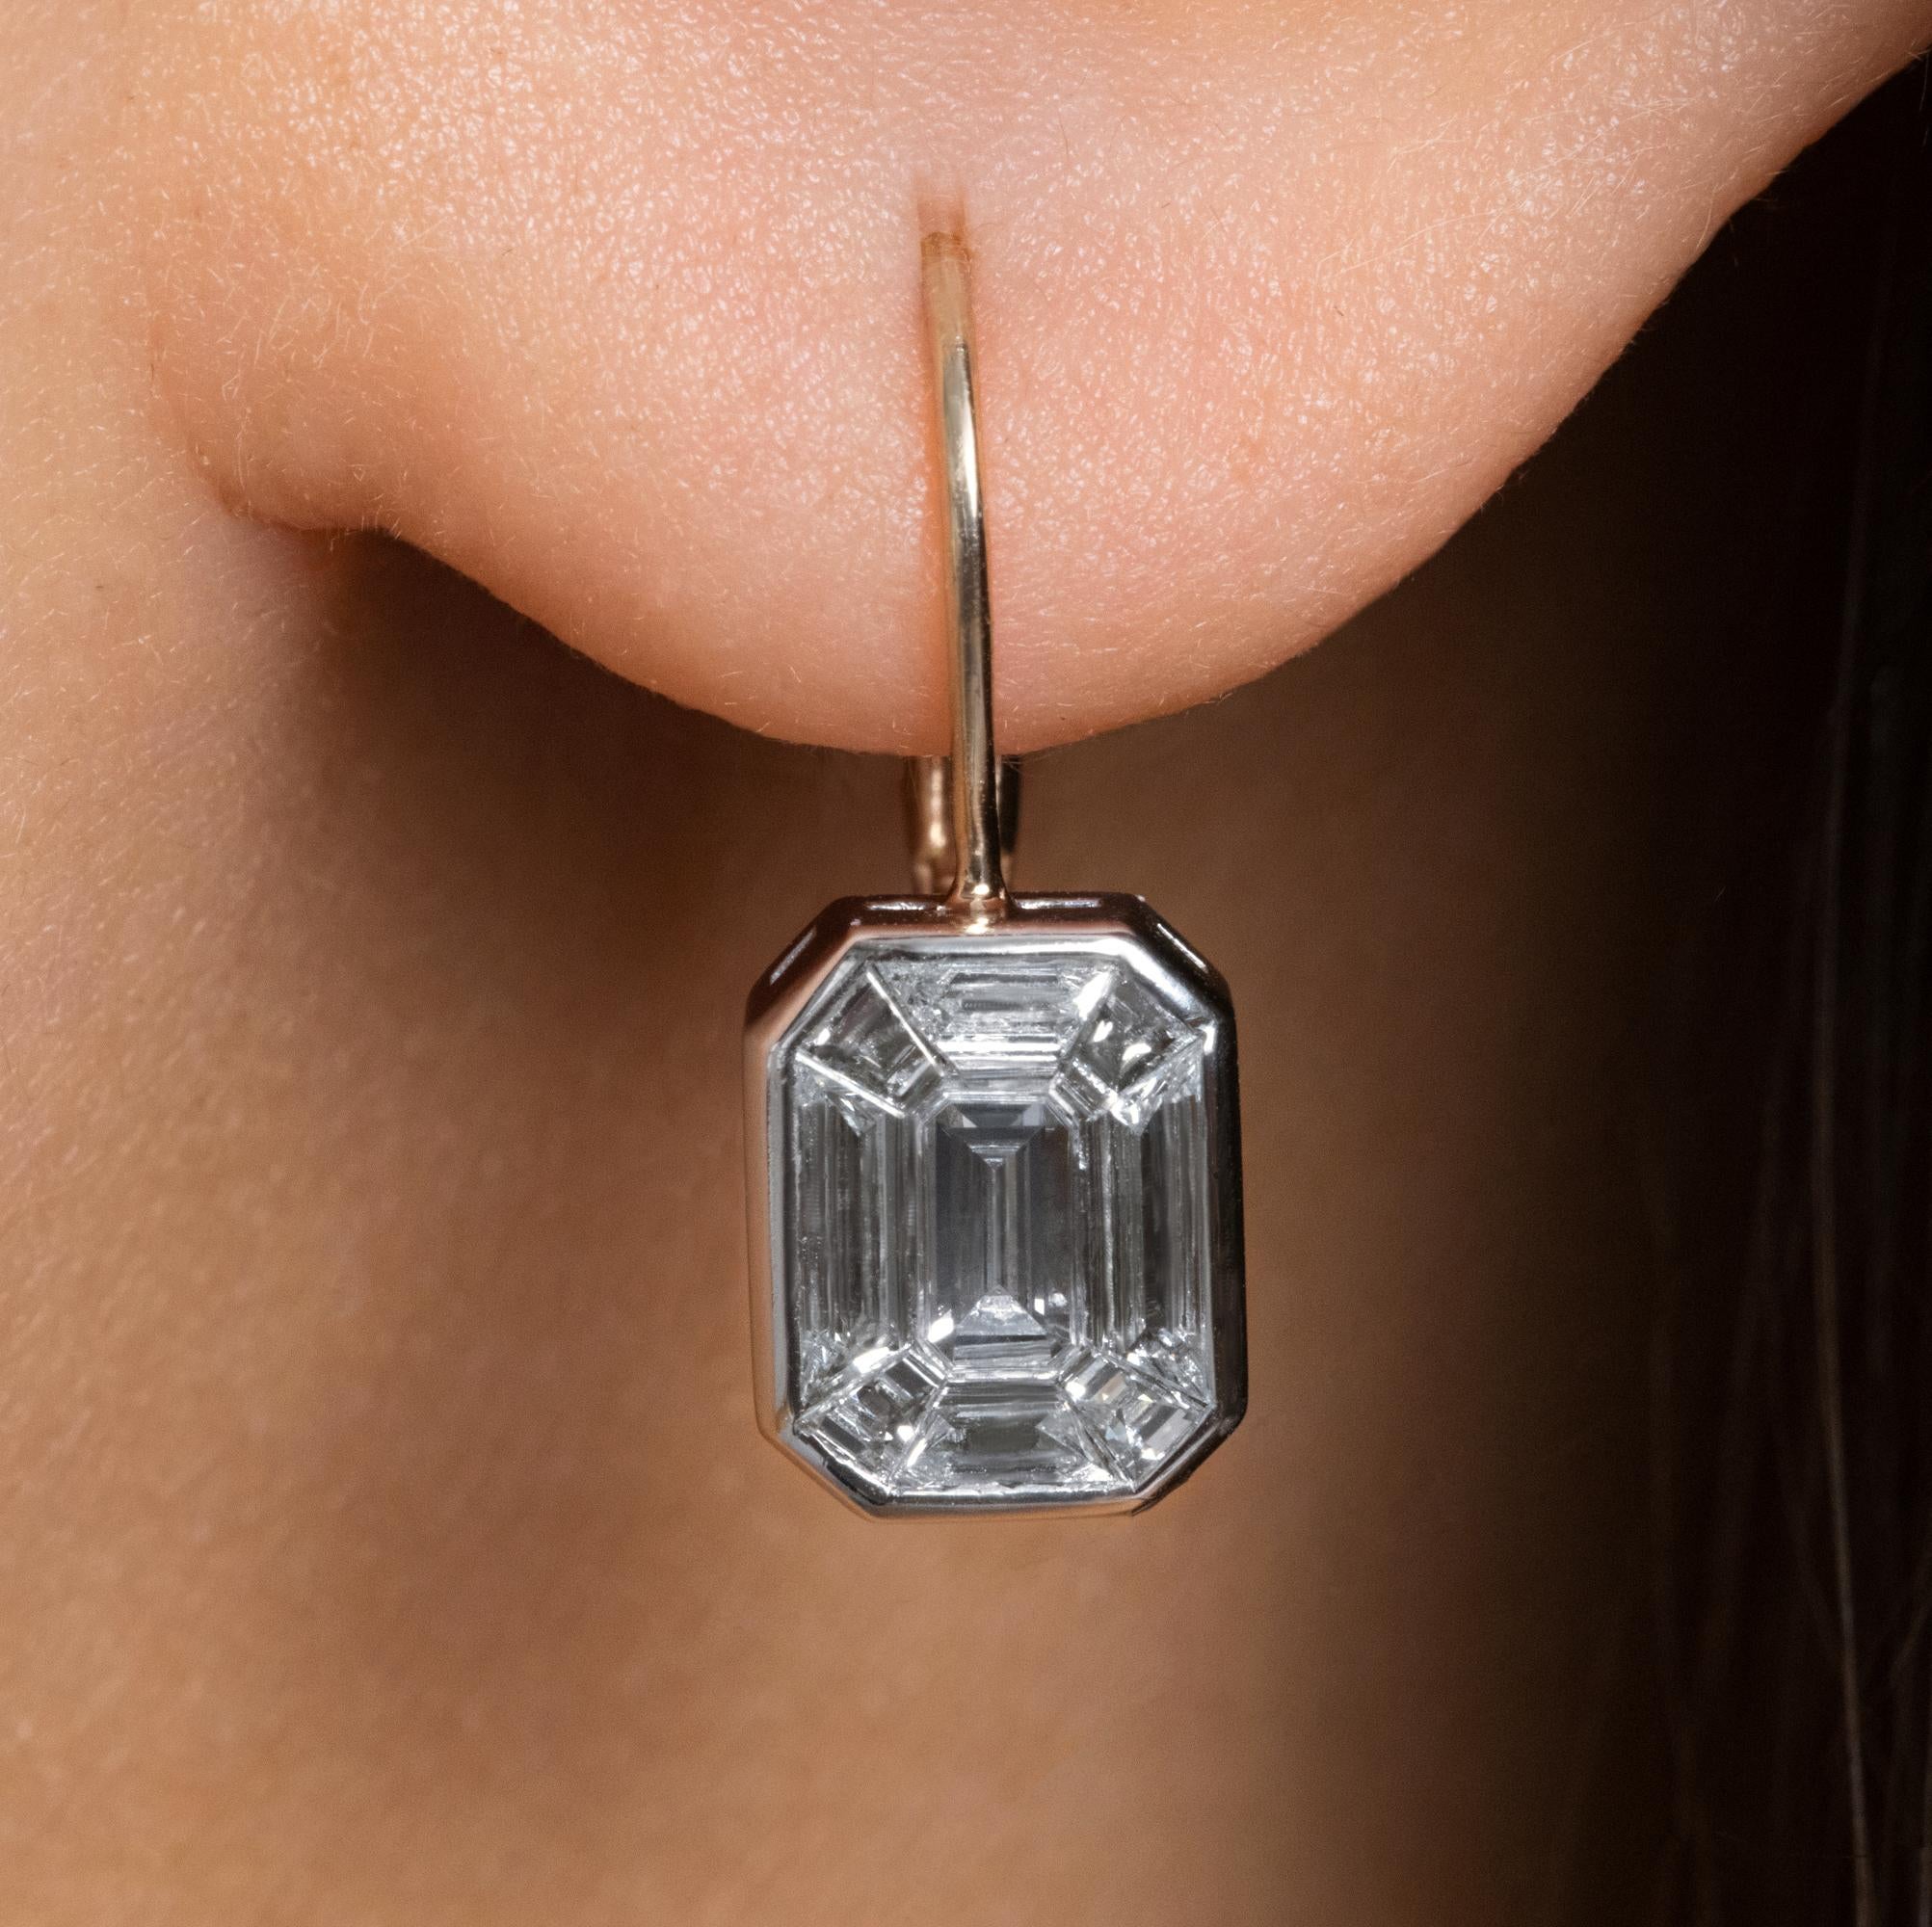 Timeless 18k & Platinum 6.0ct Face Up Solitaire Diamond Drop Earrings in Emerald Cut shape.

One accessory that has never gone out of style is the solitaire diamond earrings...These earrings will be a perfect gift for any occasion. A killer